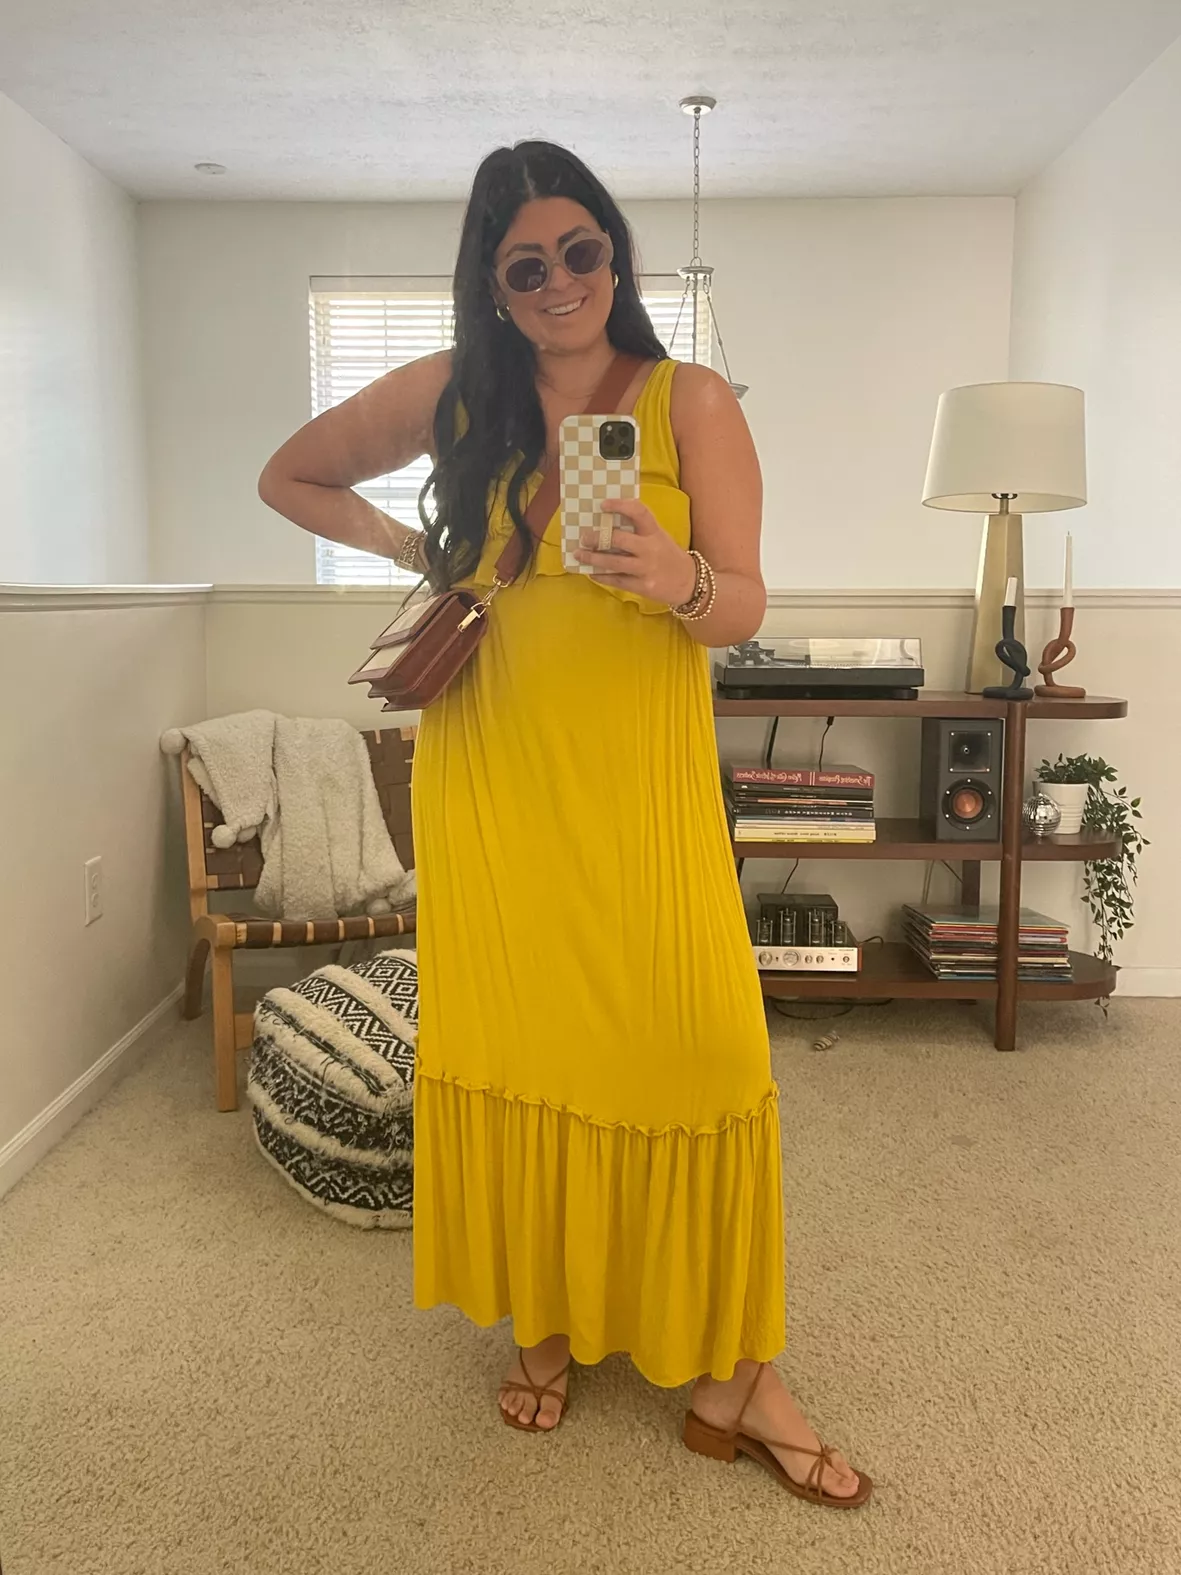 Cause for Commotion Golden Yellow Pleated Bustier Maxi Dress